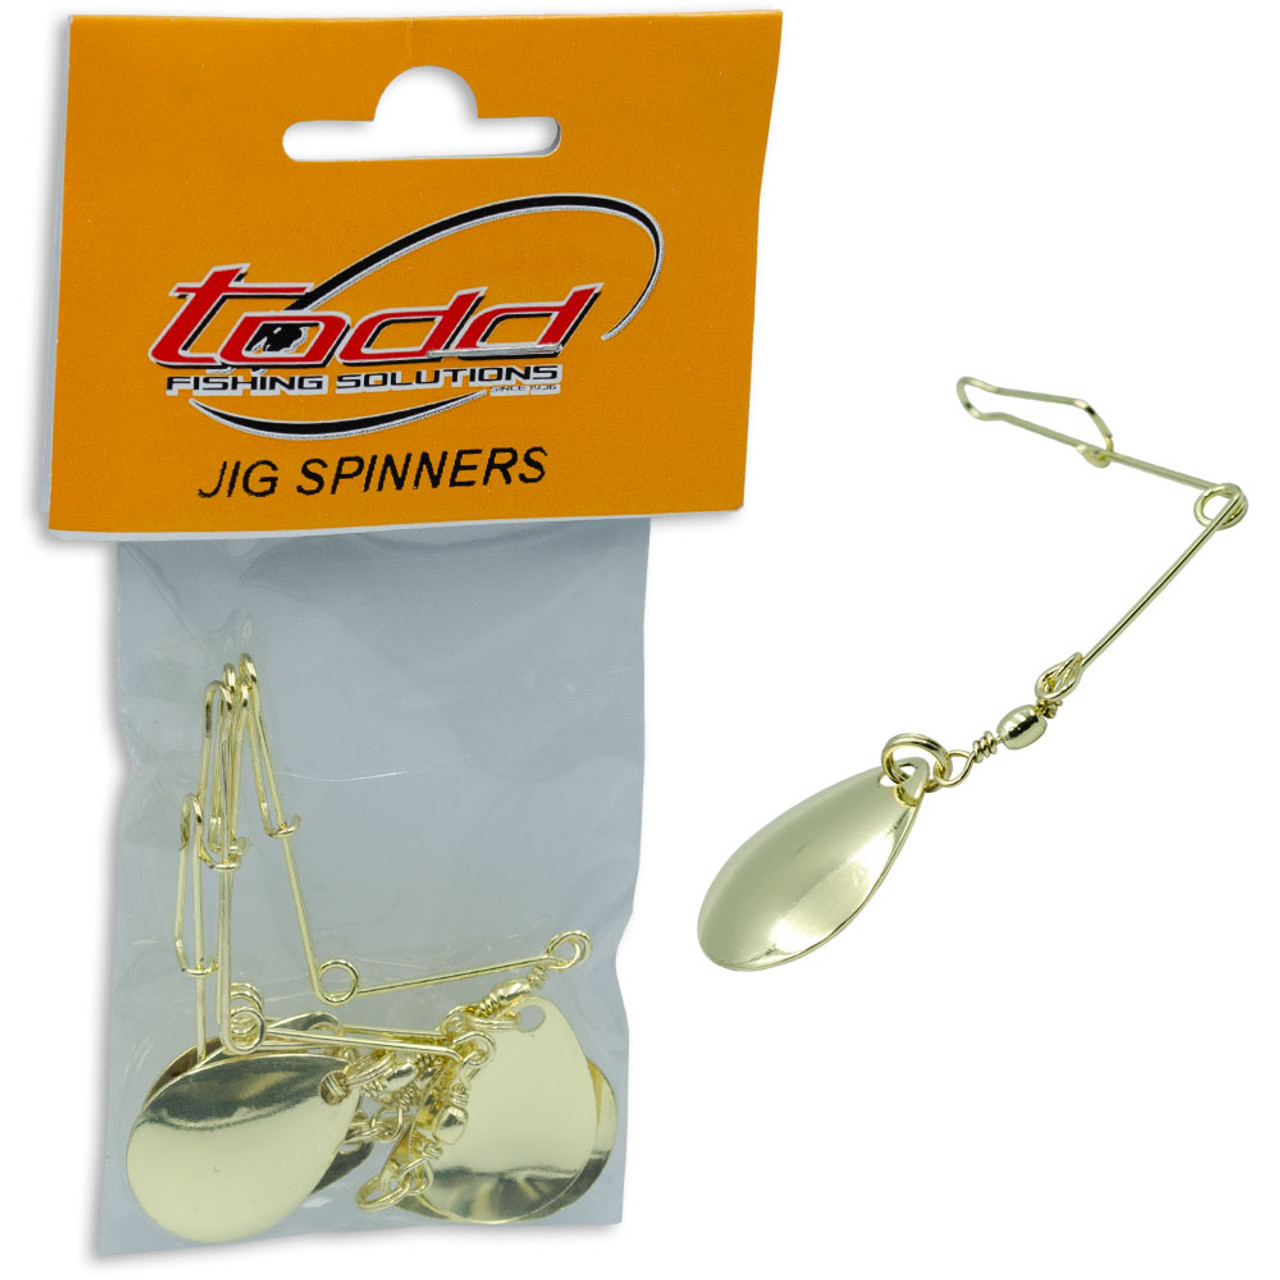 EJ Todd Jig Spinners